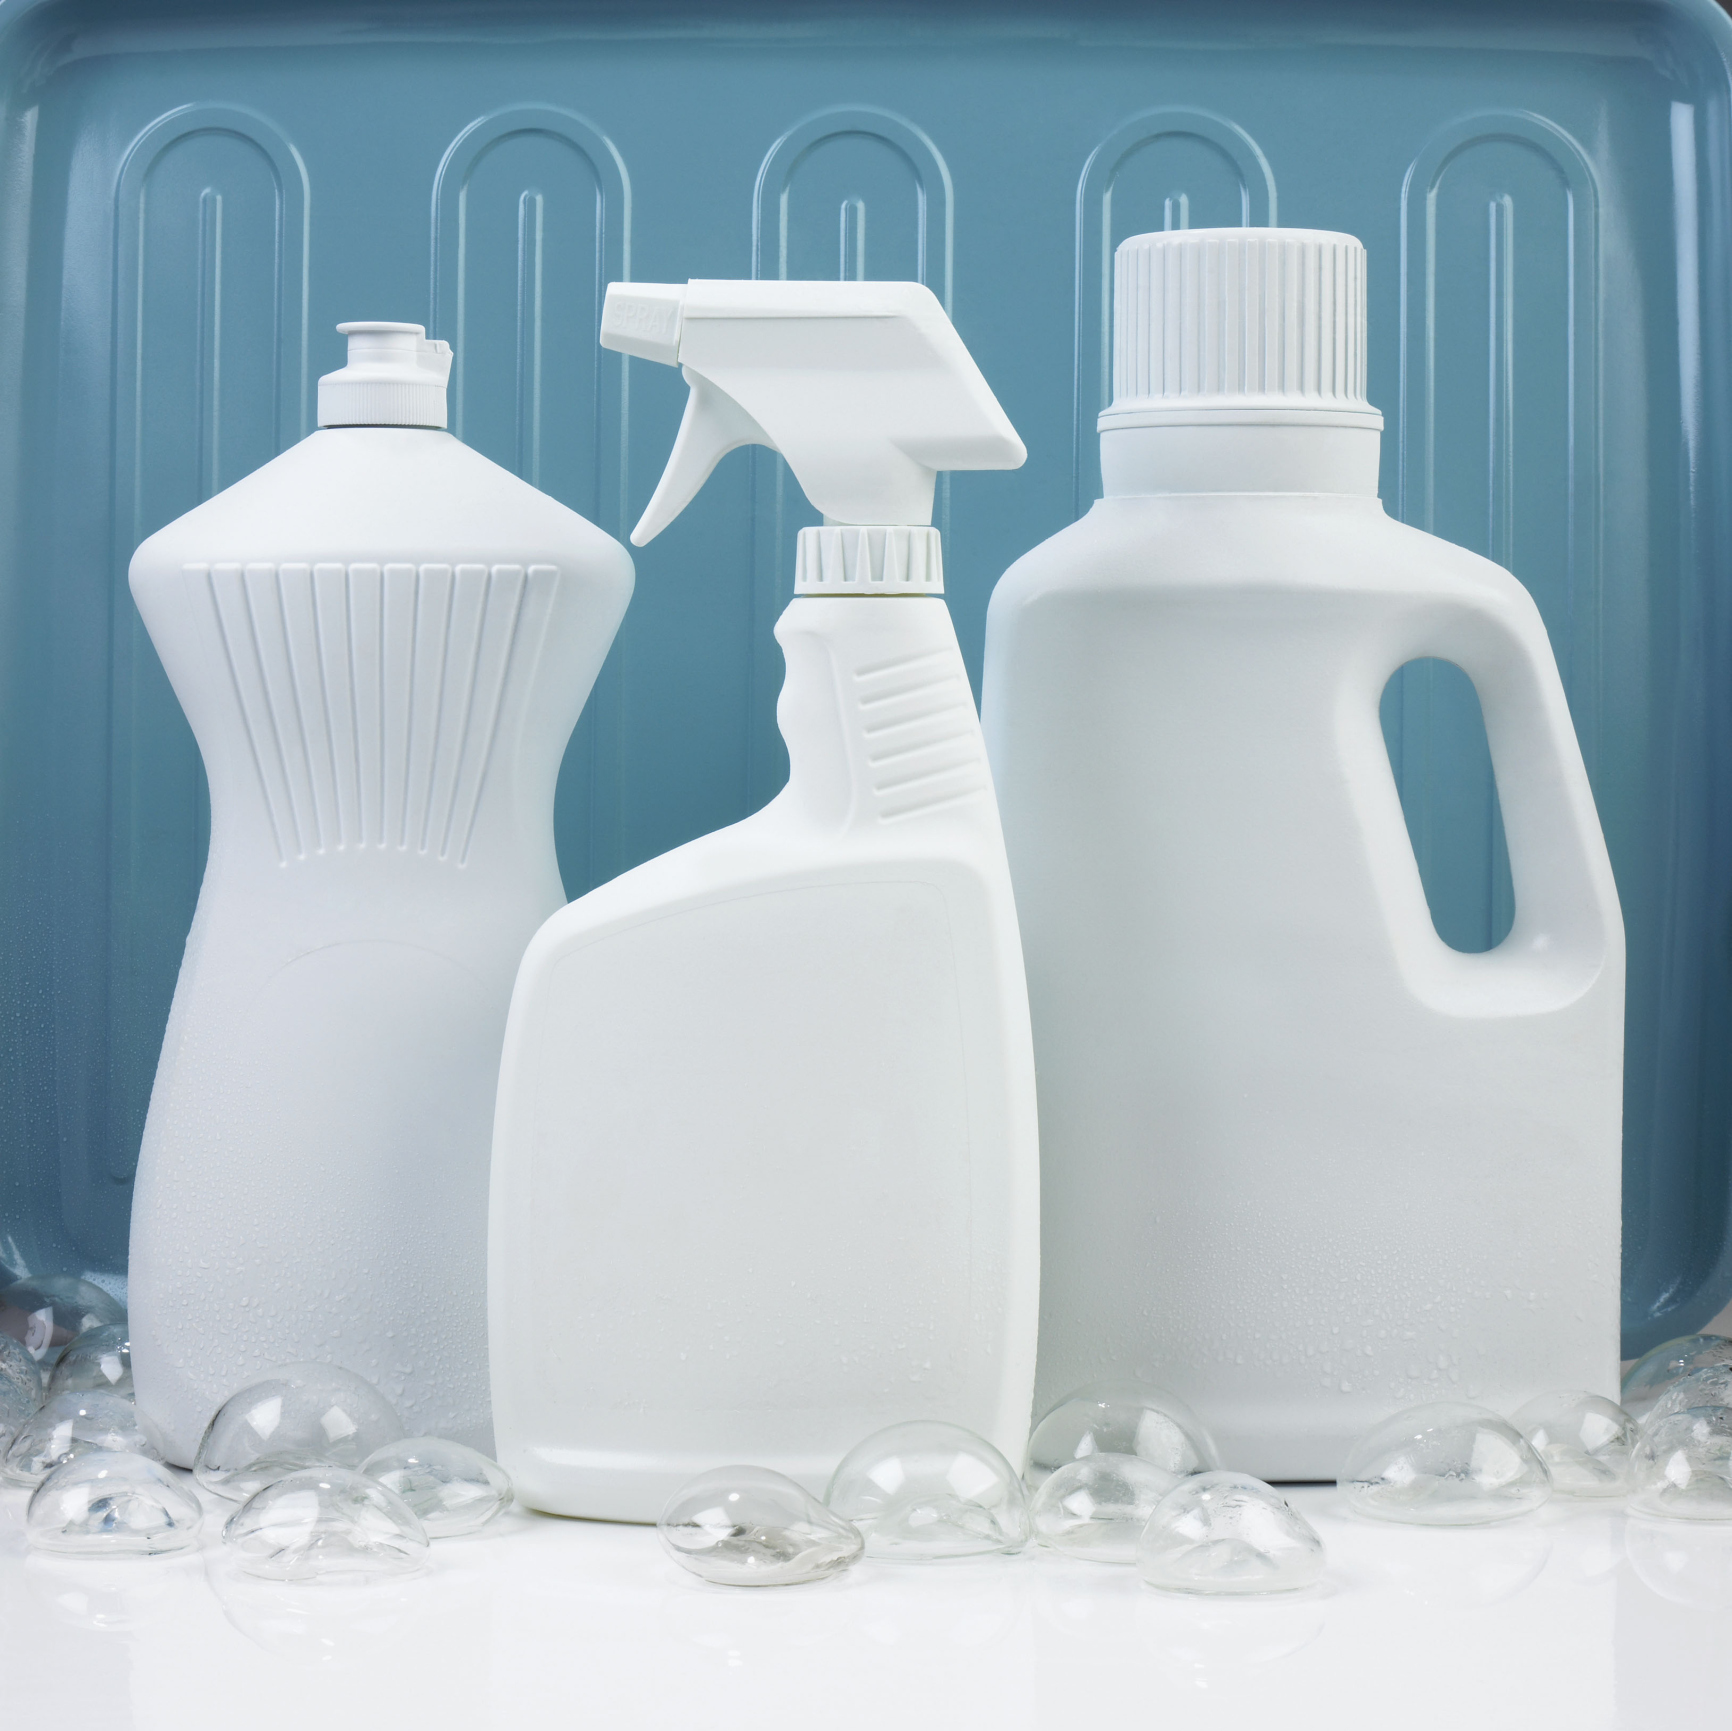 Chemicals and detergents